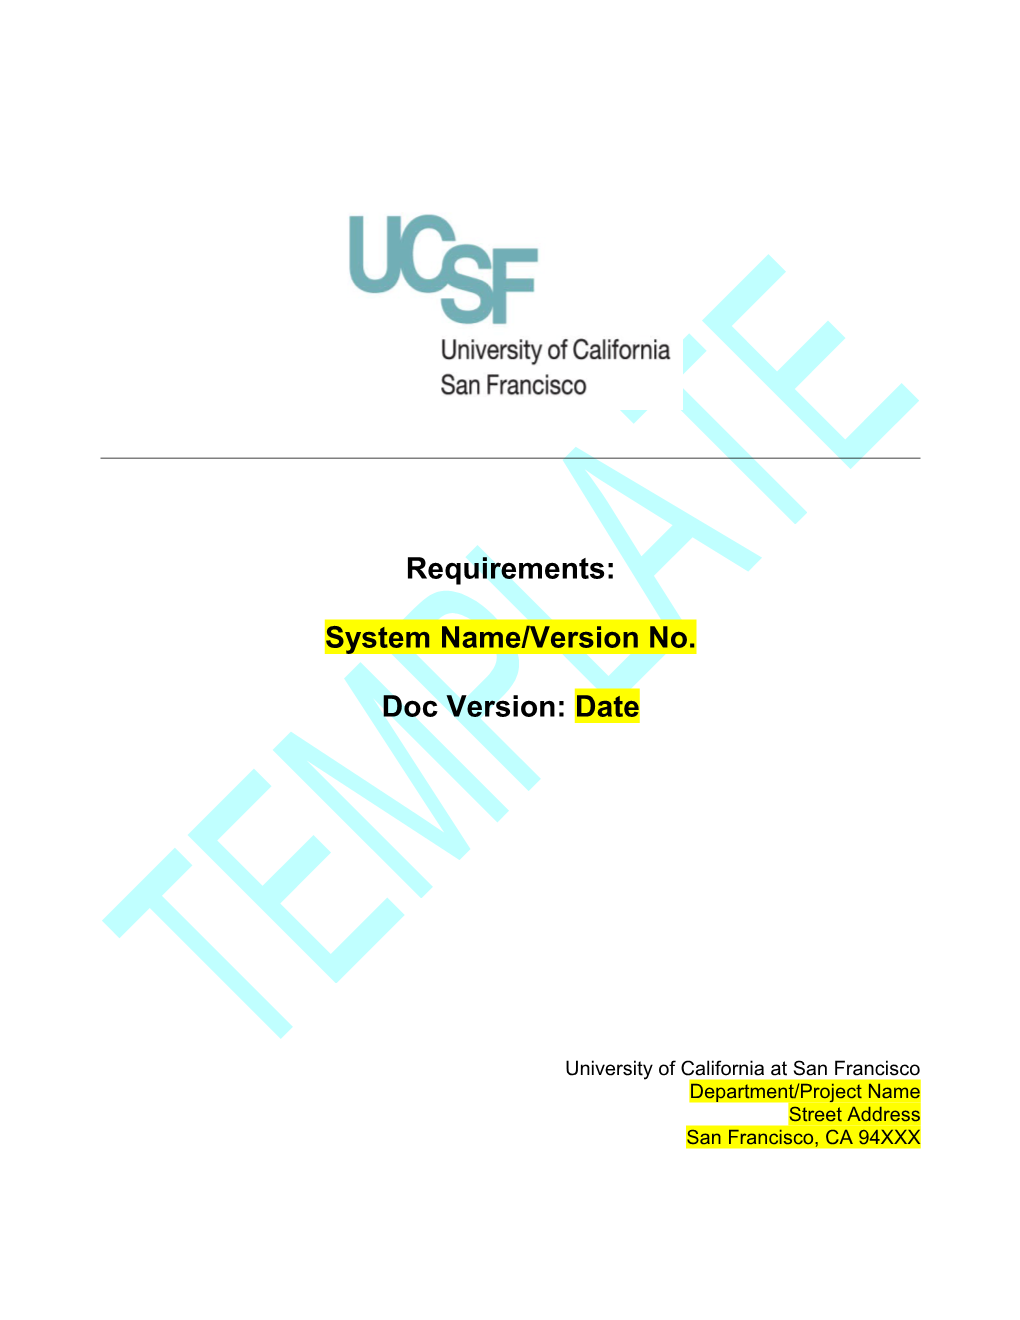 Requirements for System Name/Version No